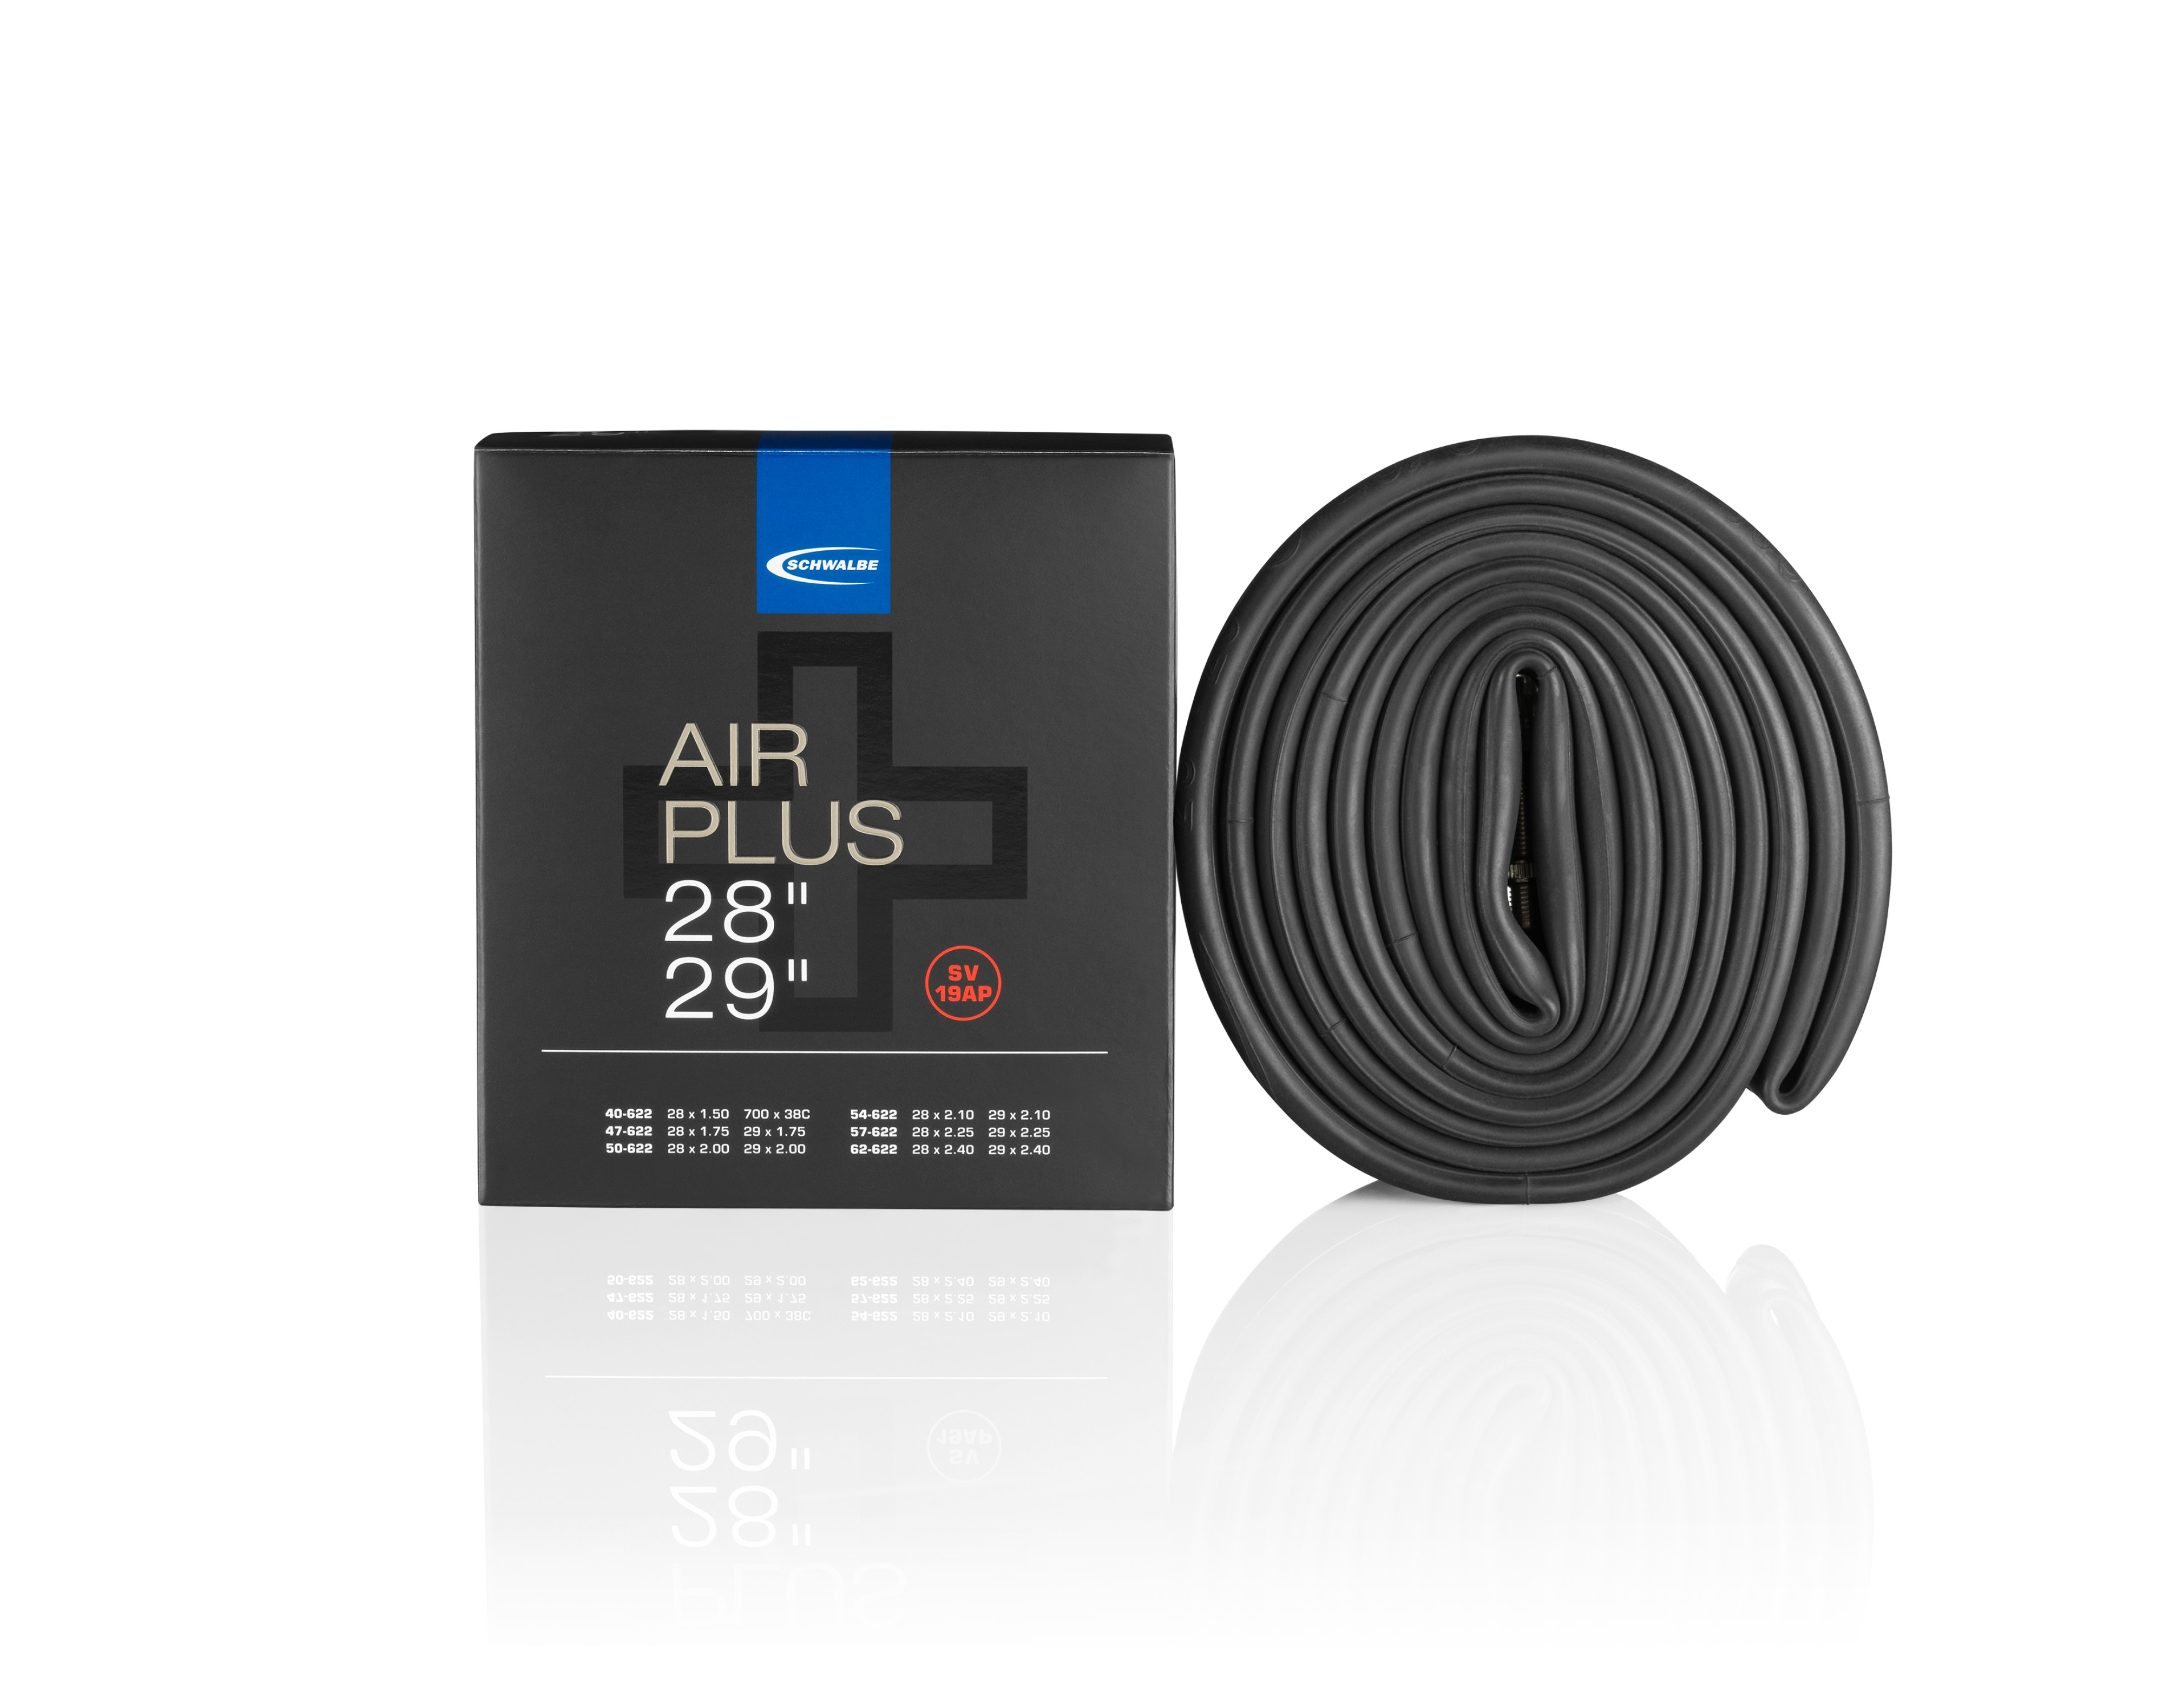 AIR PLUS - THE TUBE THAT TRULY HOLDS ITS BREATH